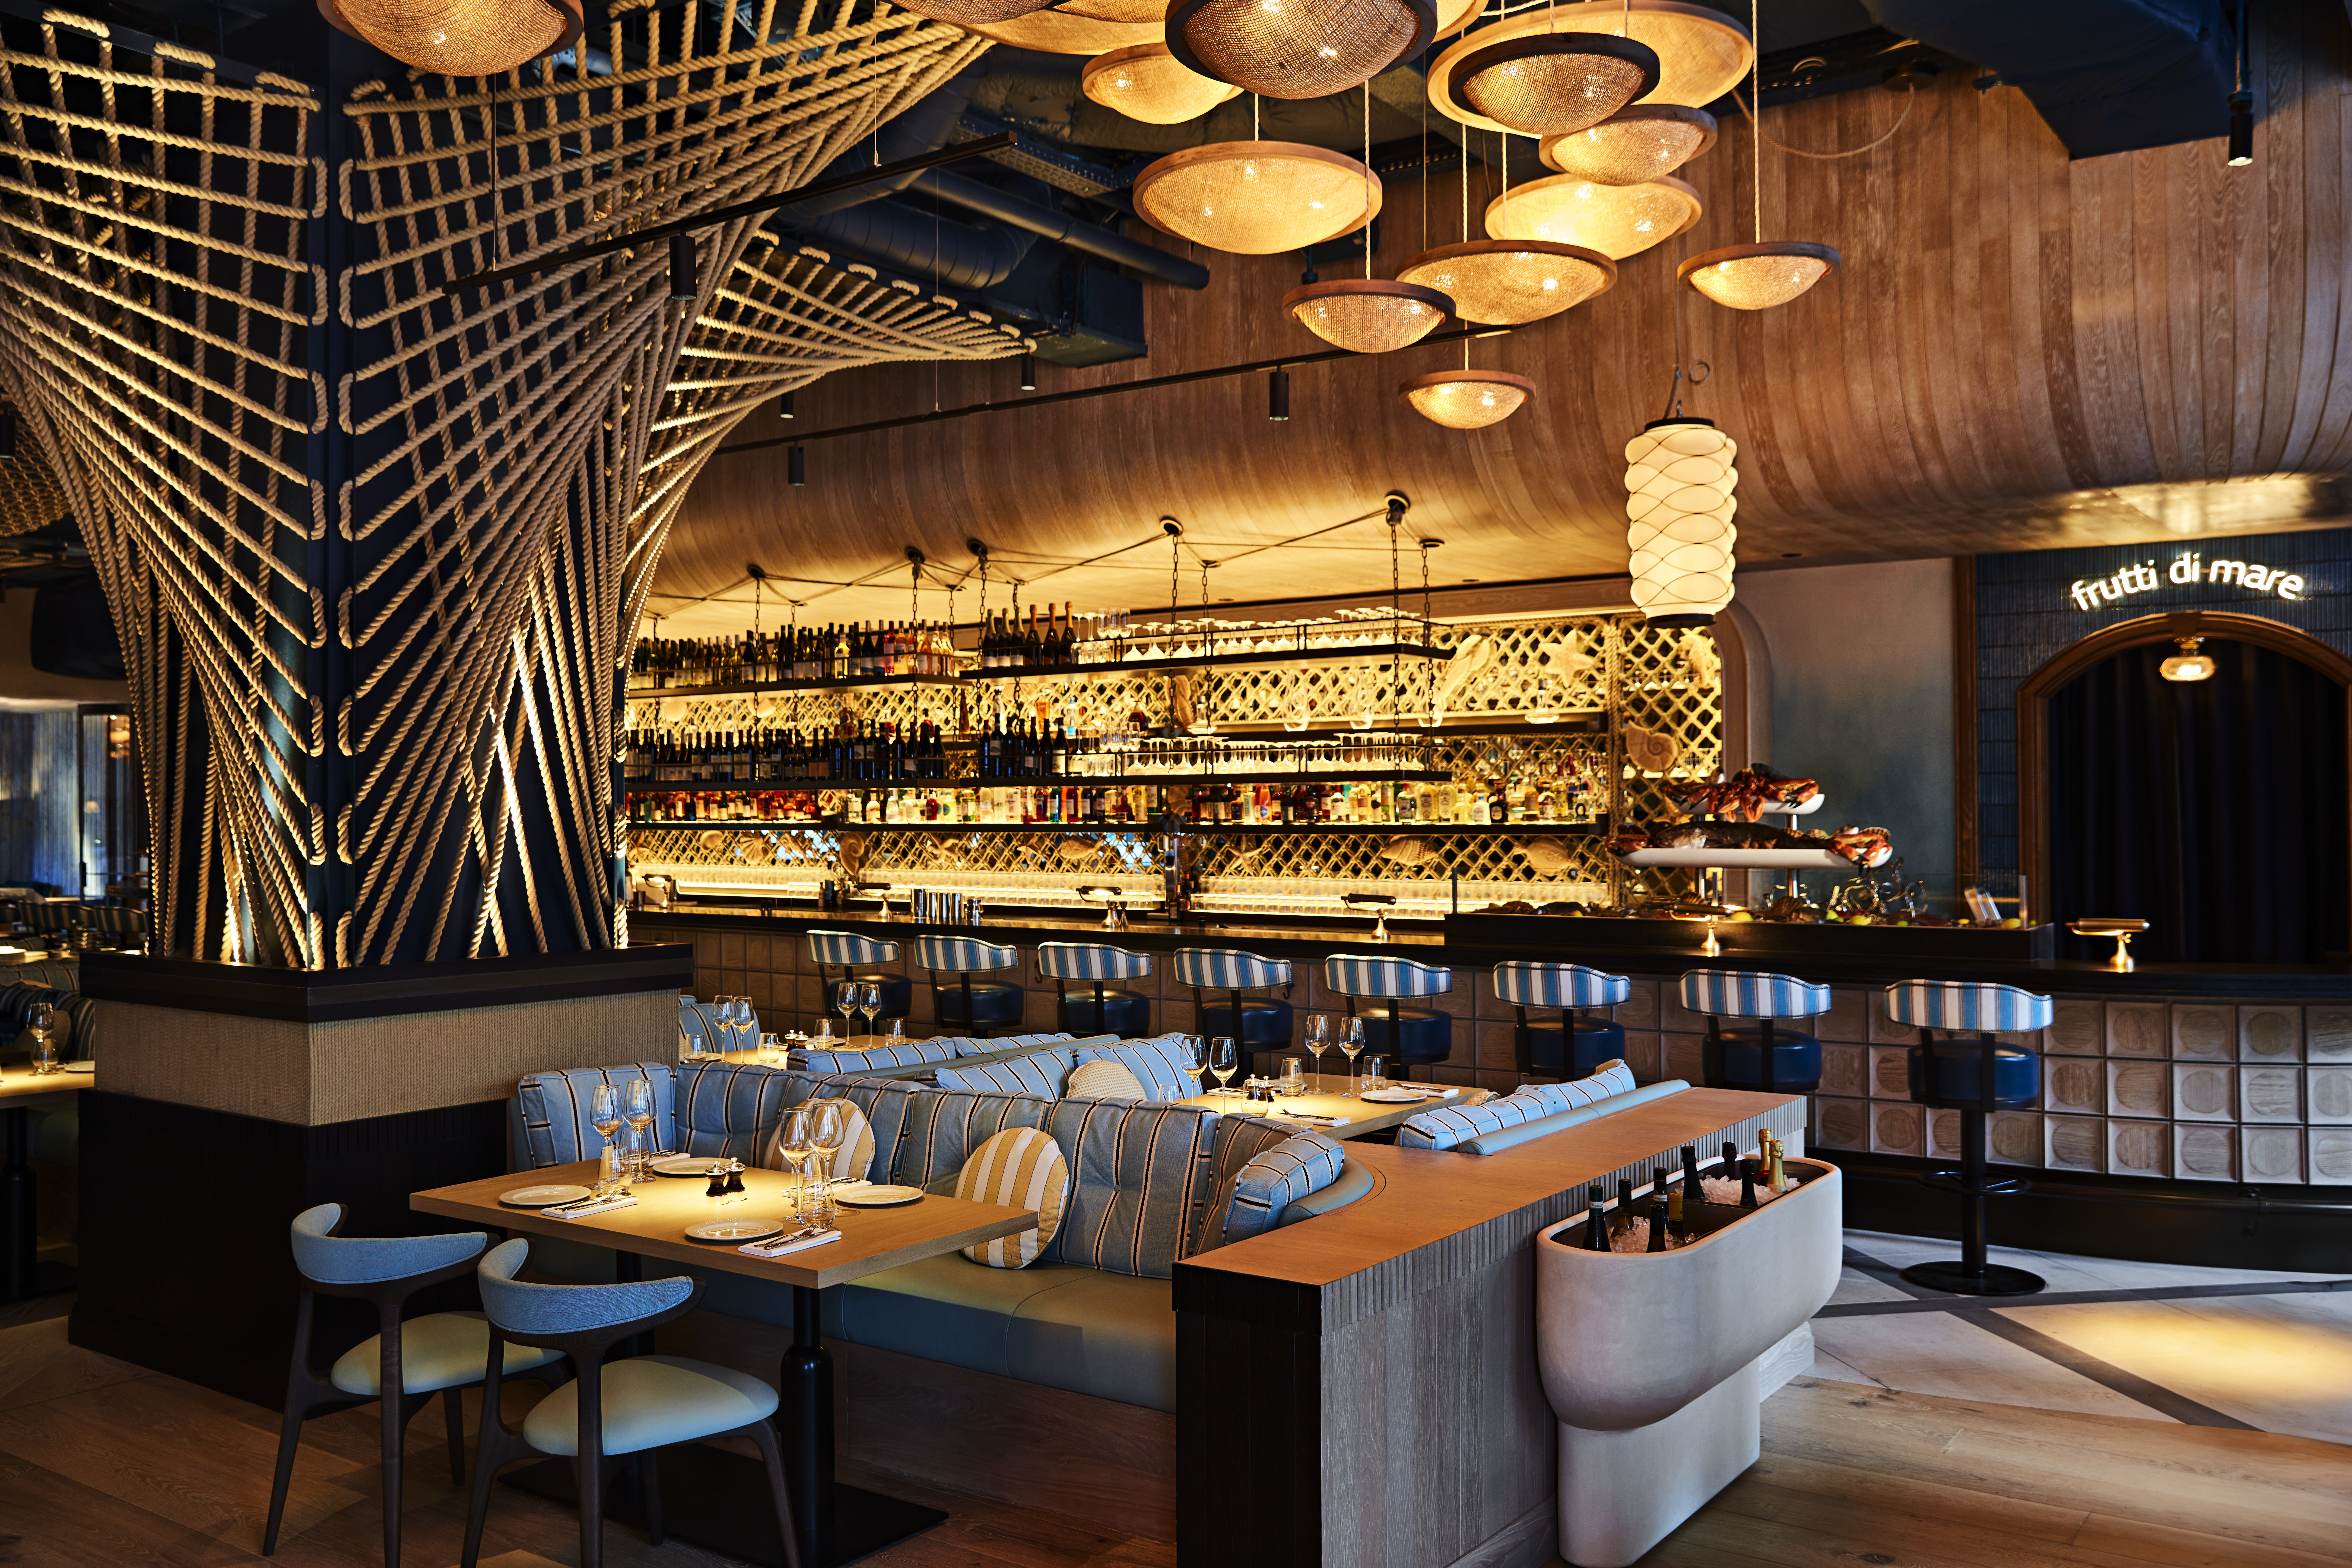 Azzurra Restaurant Chelsea by founder  David Yeo and designed by Robert Angell